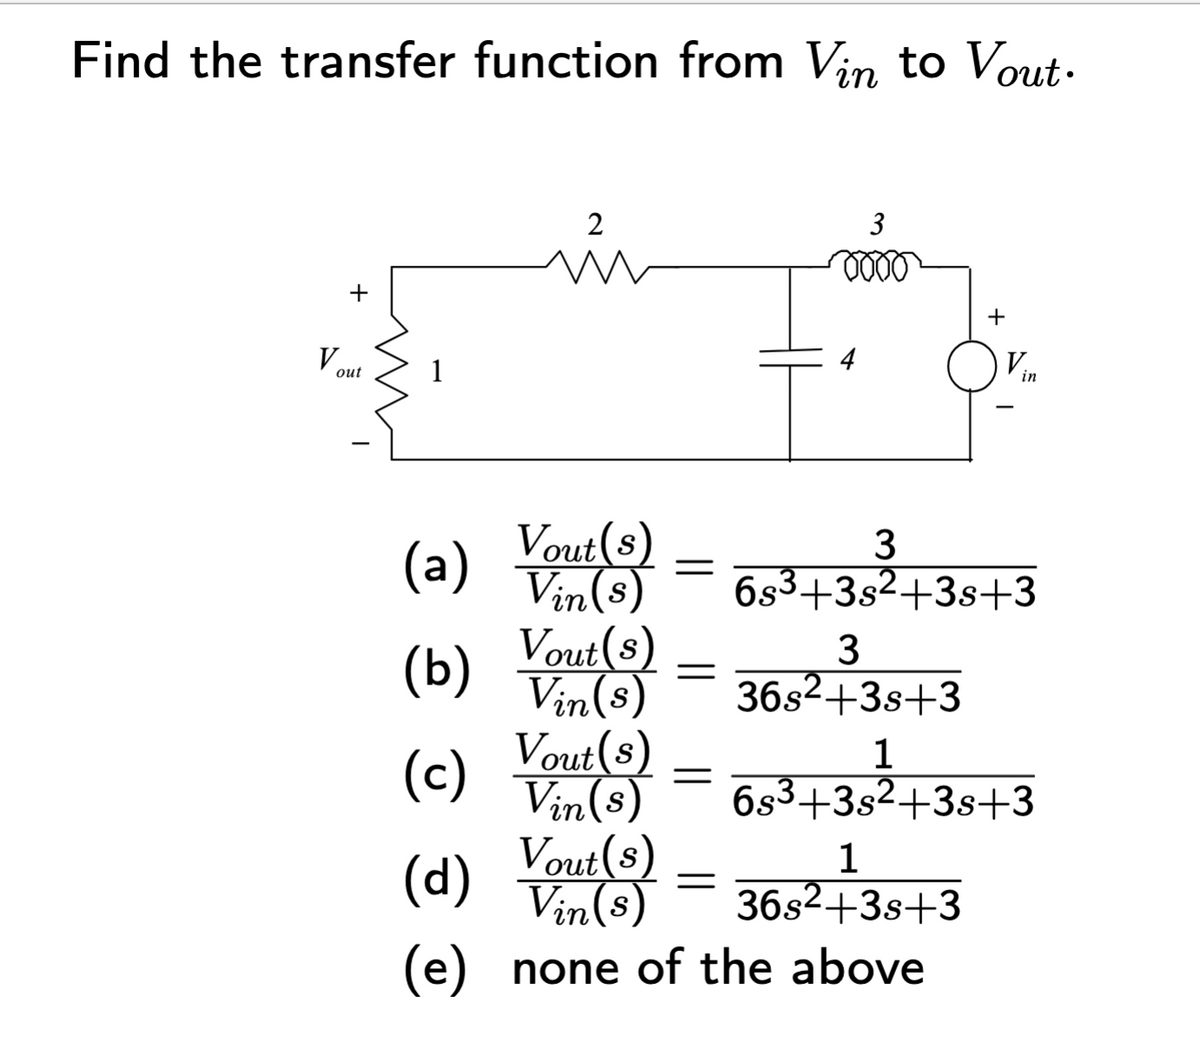 Find the transfer function from Vin to Vout.
V out
1
2
☎
T
(a) Vout(s) = 683+38² +38+3
Vout(s)
Vin(s)
3
3
36s²+3s +3
(b)
(c)
(d) Vu() = 36s²+38+3
Vin(s)
(e) none of the above
=
+
in
Vout(s)
1
Vin(s) 6s³+3s²+3s+3
3+35² +3
Vout(s)
1